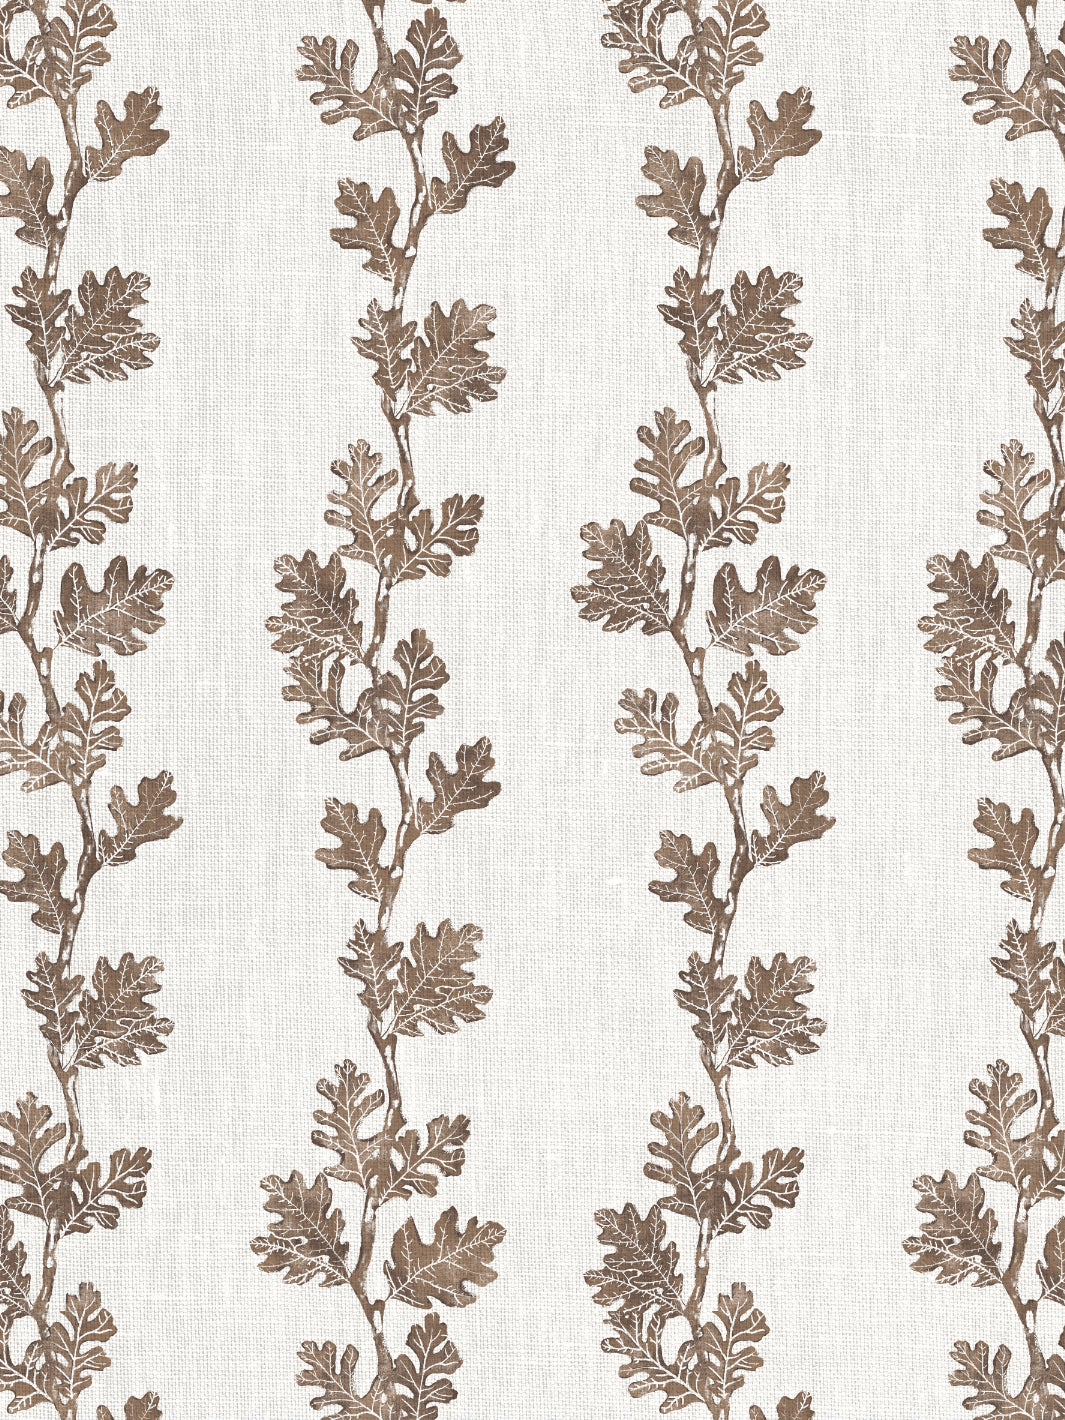 'Valley Oak Stripe' Linen Fabric by Nathan Turner - Brown